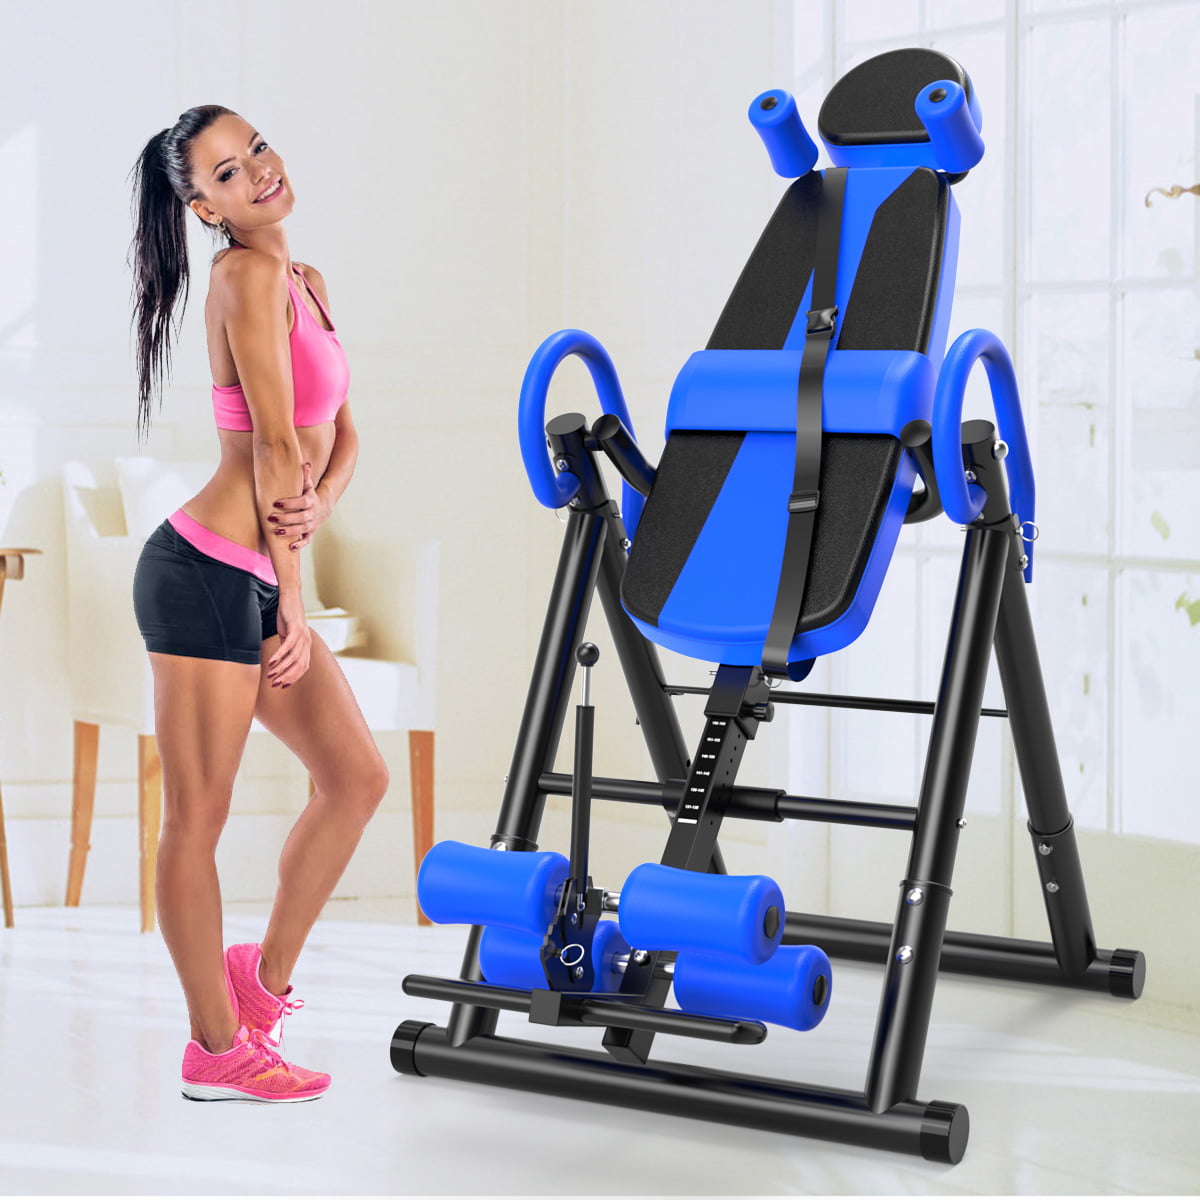 Details about   Inversion Table Back Pain Therapy Heavy Duty Relief Fitness Hang Gravity 